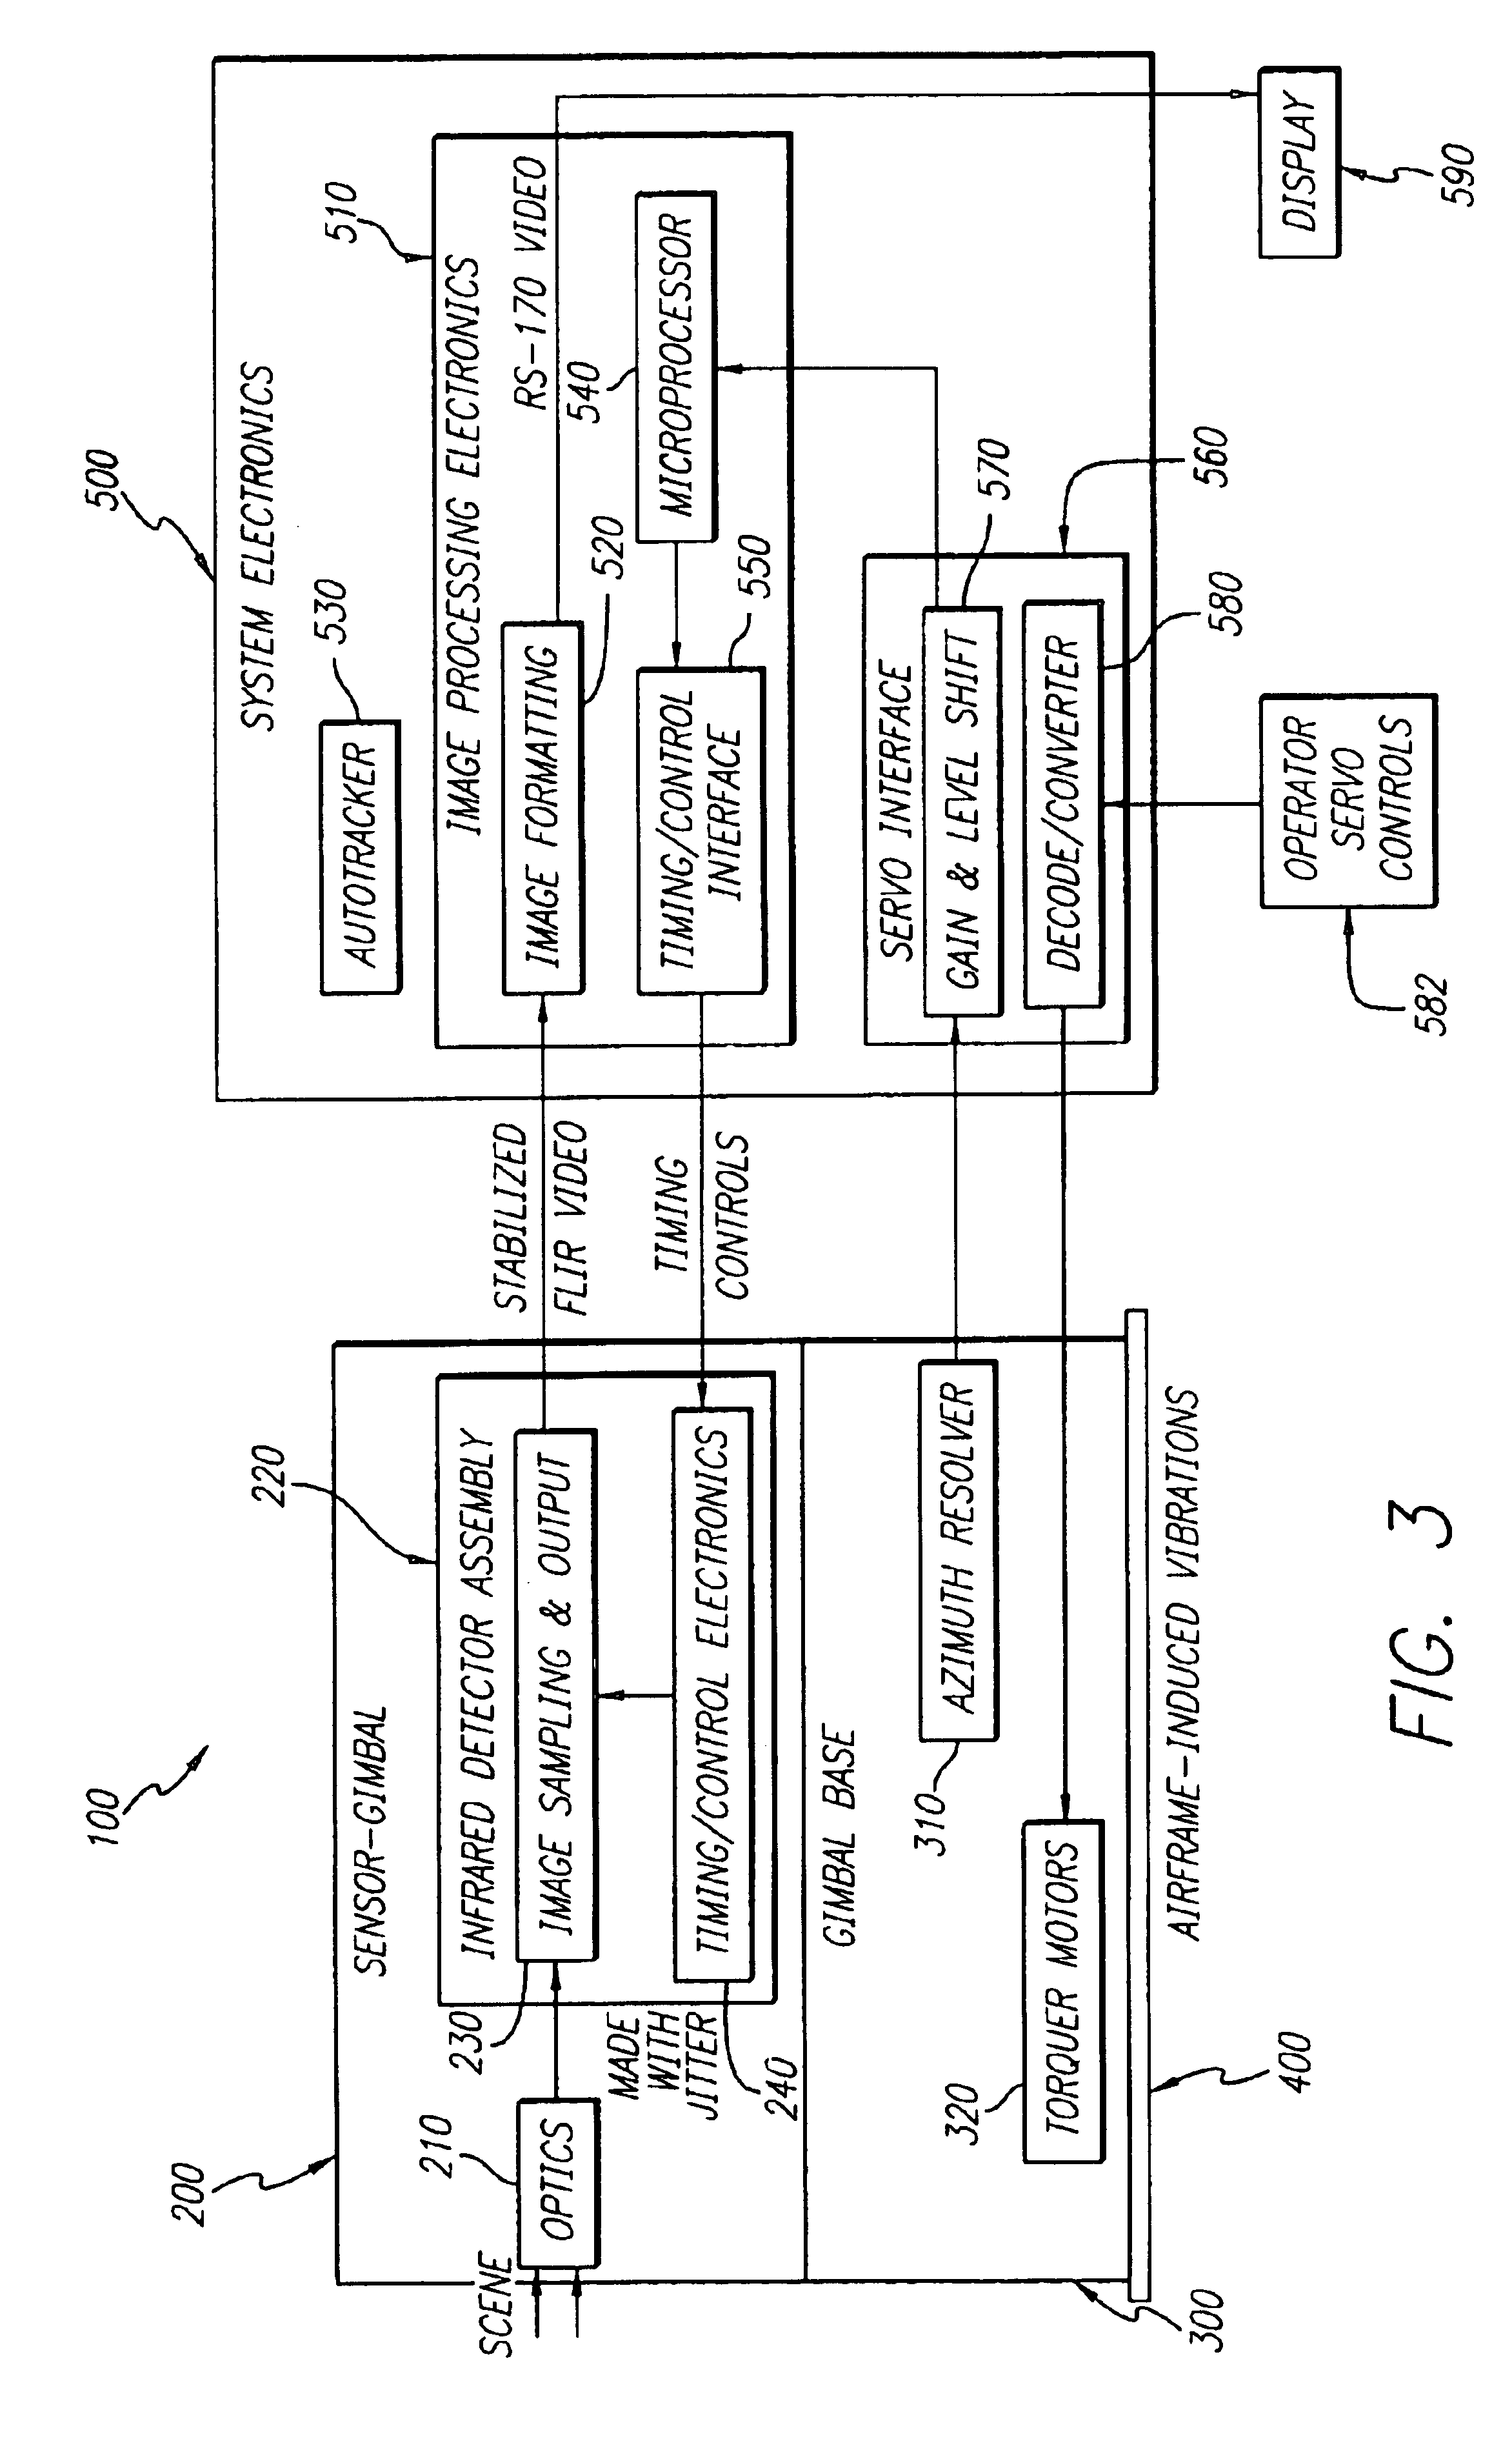 System and method for electronic stabilization for second generation forward looking infrared systems